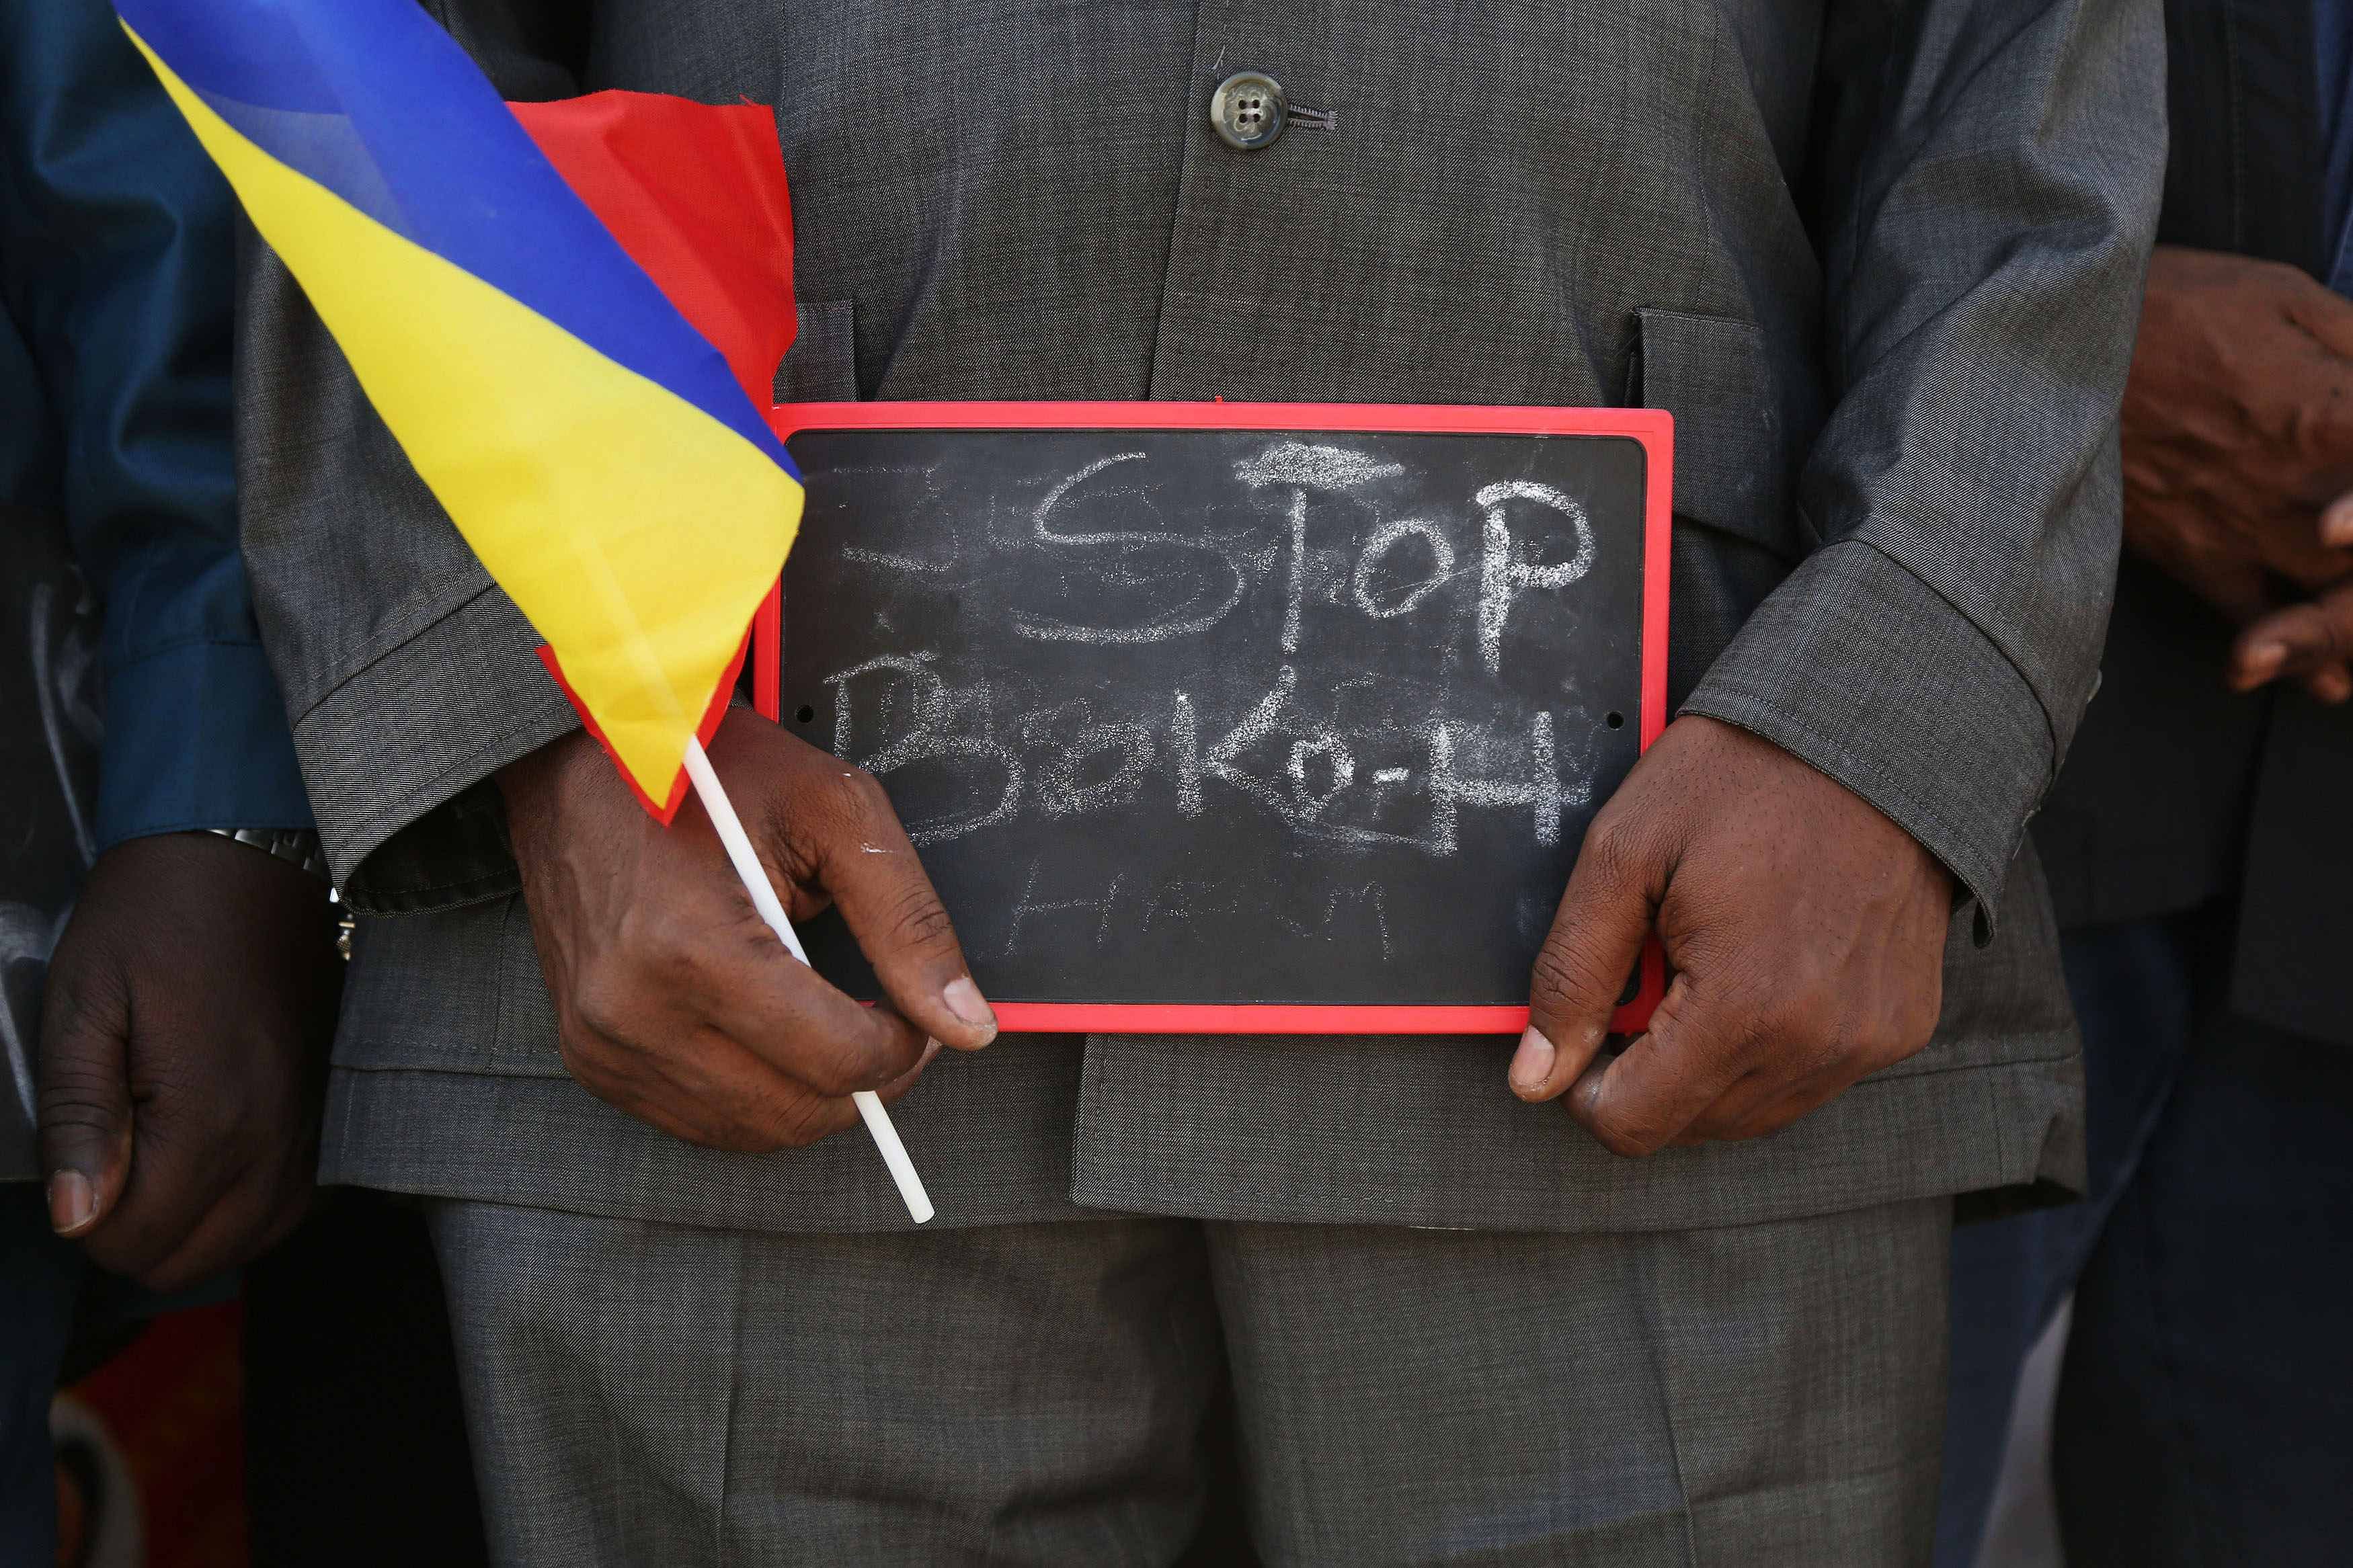 A man holds a sign that reads "Stop Boko Haram" at a rally to support Chadian troops heading to Cameroon to fight Boko Haram, in Ndjamena January 17, 2015. Photo: Reuters